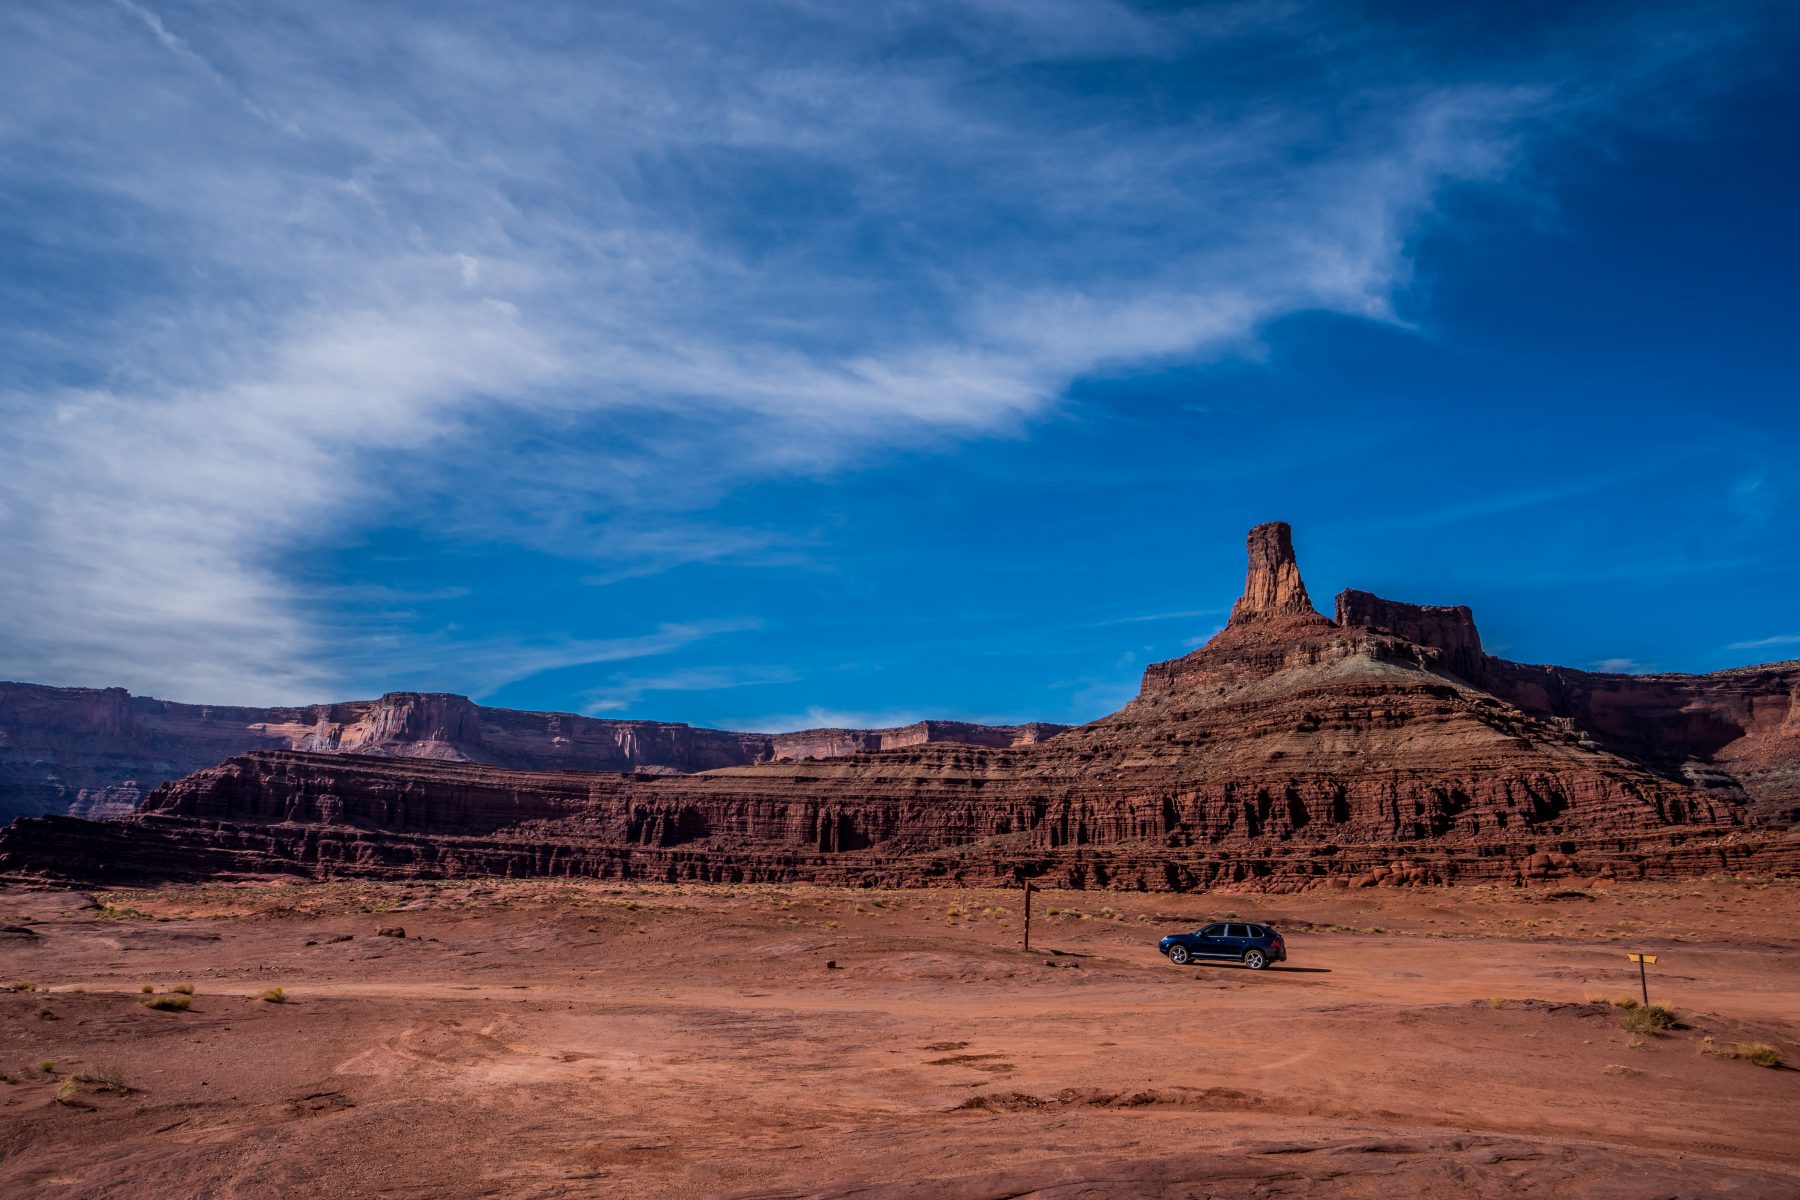 The scene at the beginning of the Shafer Trail, once I had reached the top of the Potash Road.